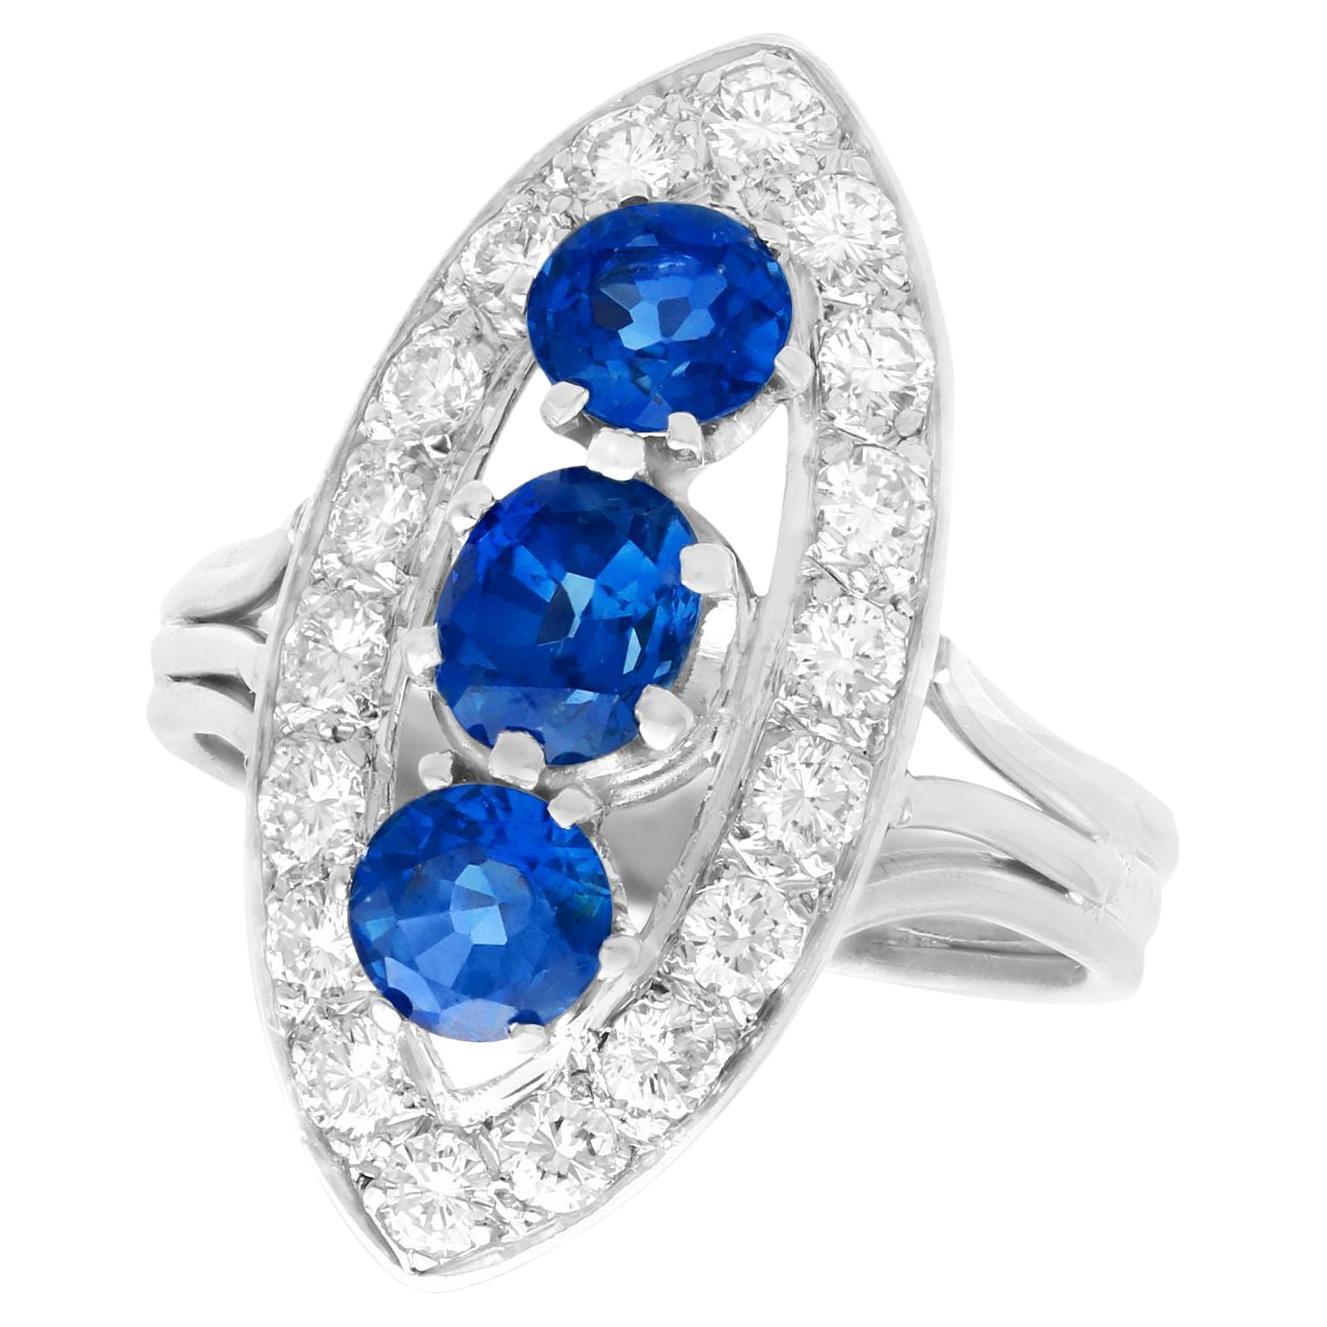 Vintage French 1.60 Carat Sapphire & 1.05 Carat Diamond White Gold Cluster Ring For Sale